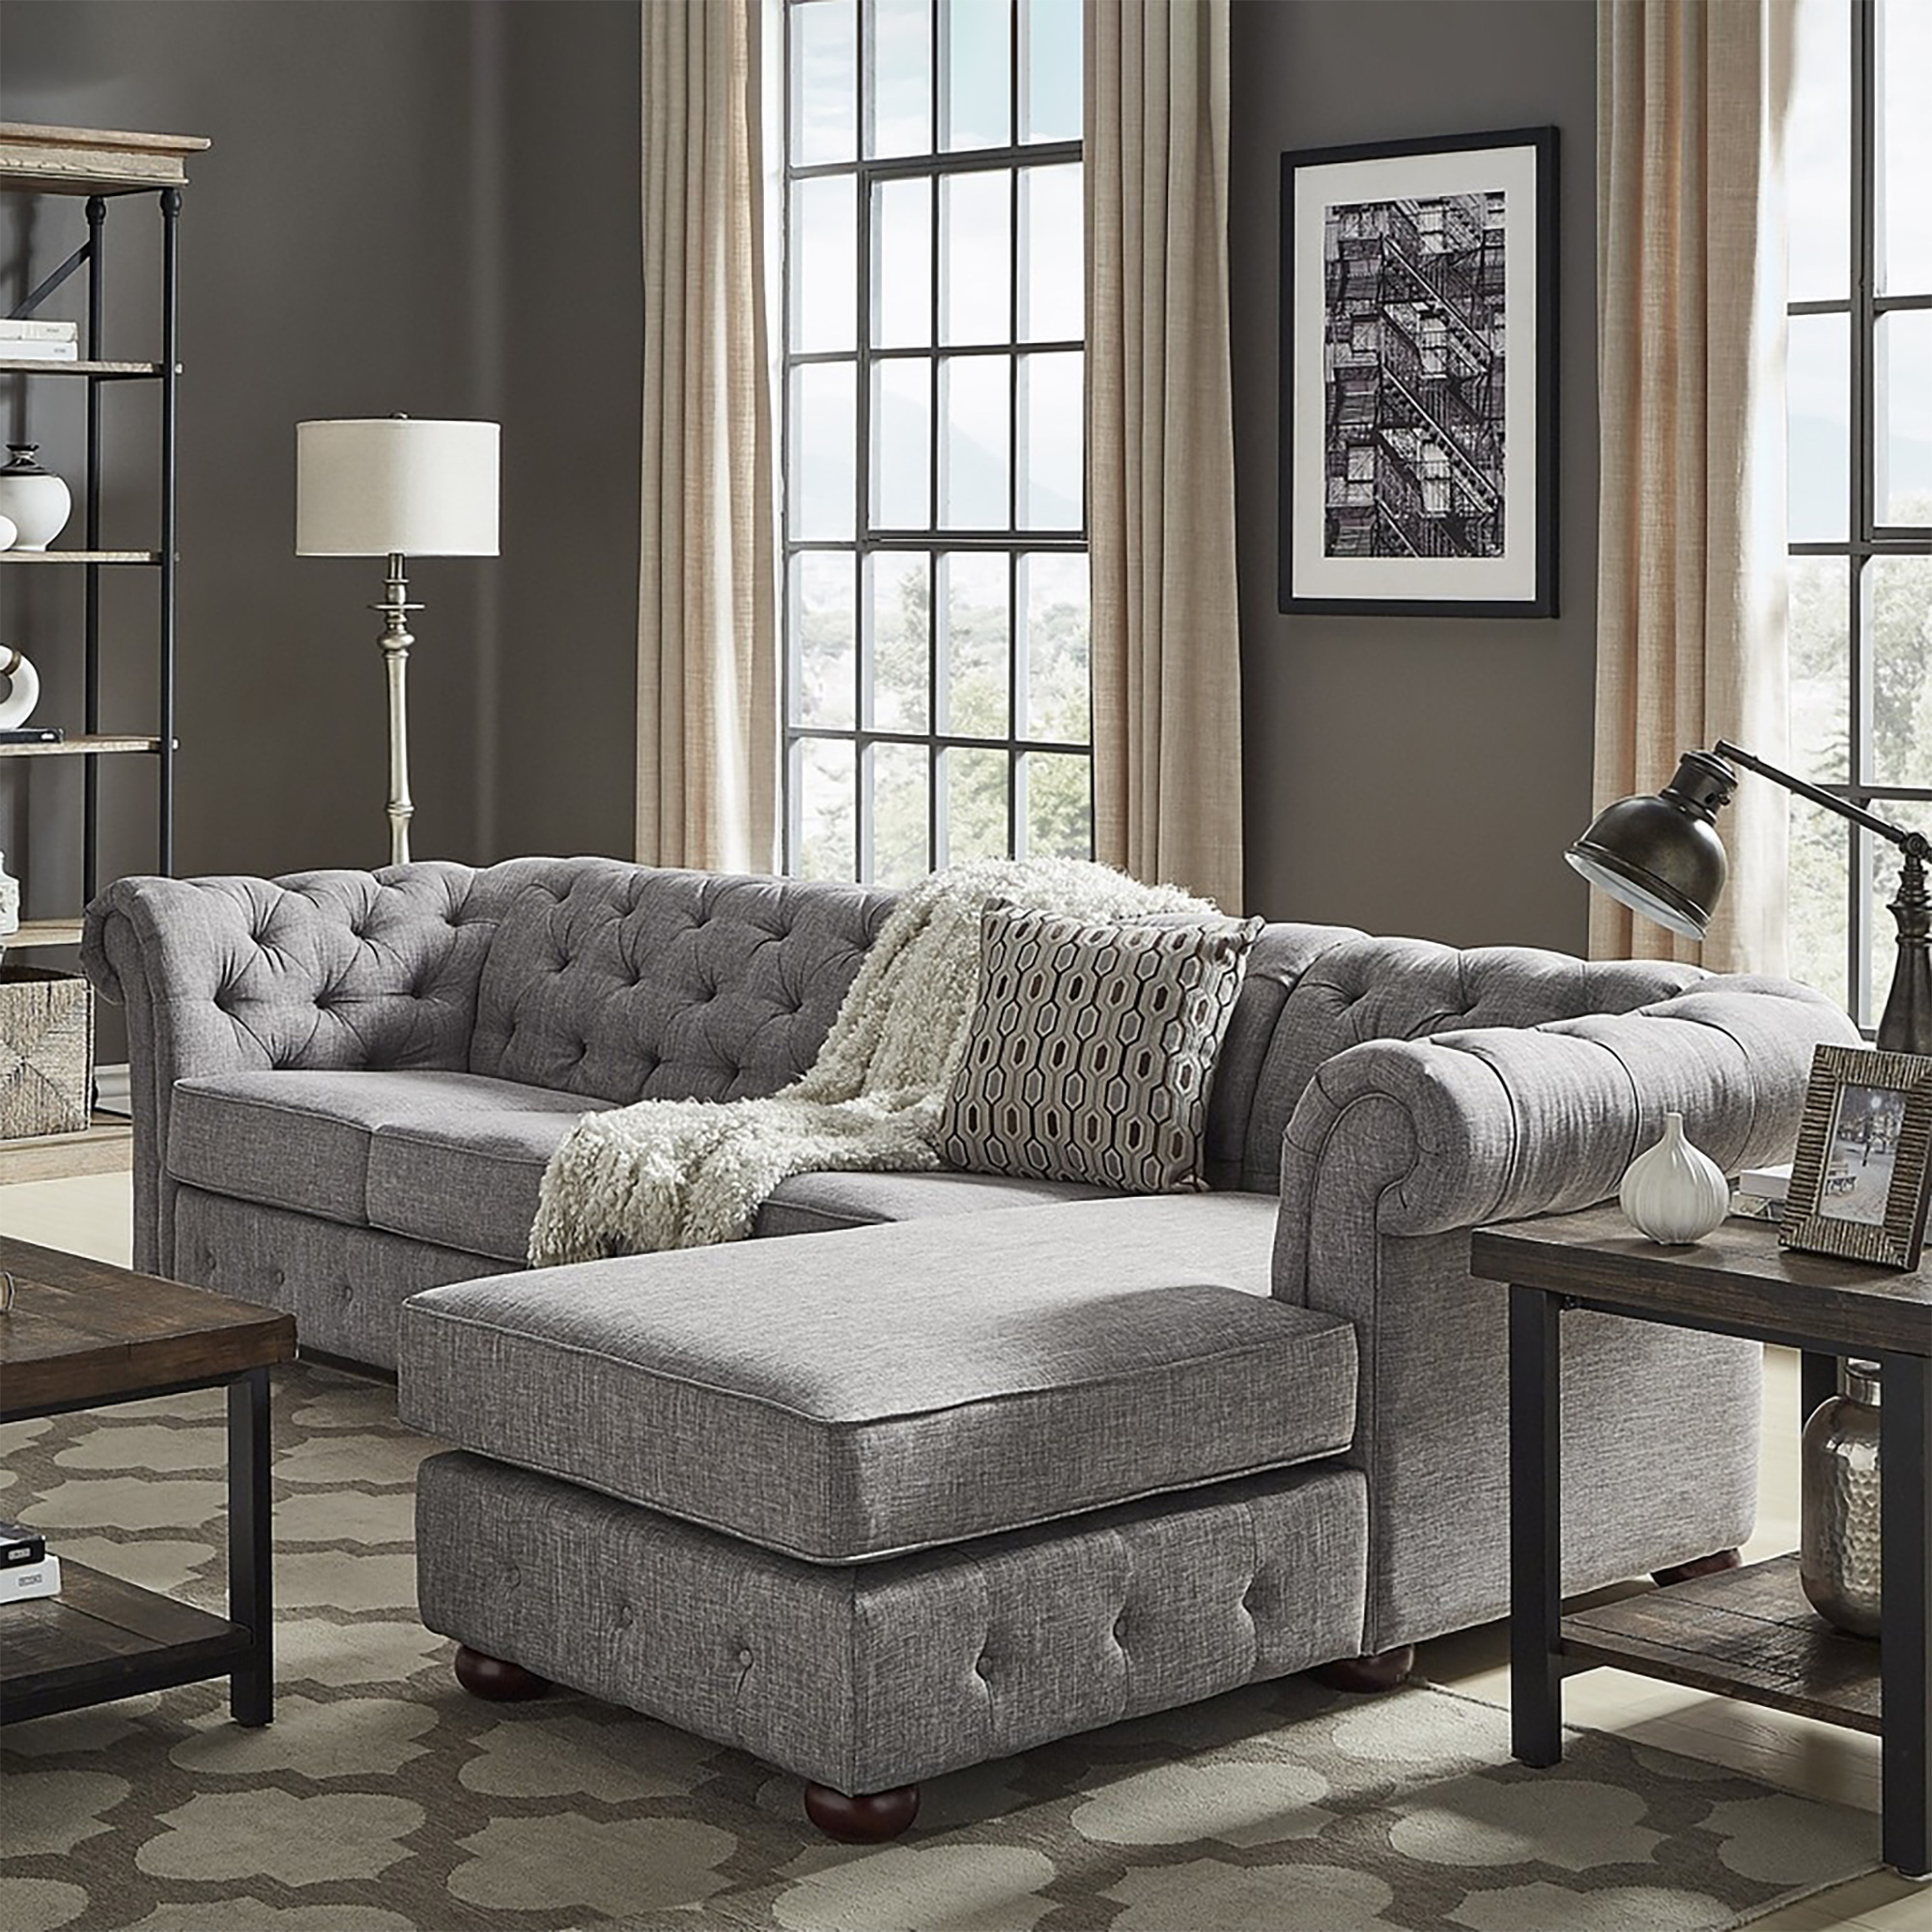 4-Seat Chesterfield Sectional Sofa with Chaise